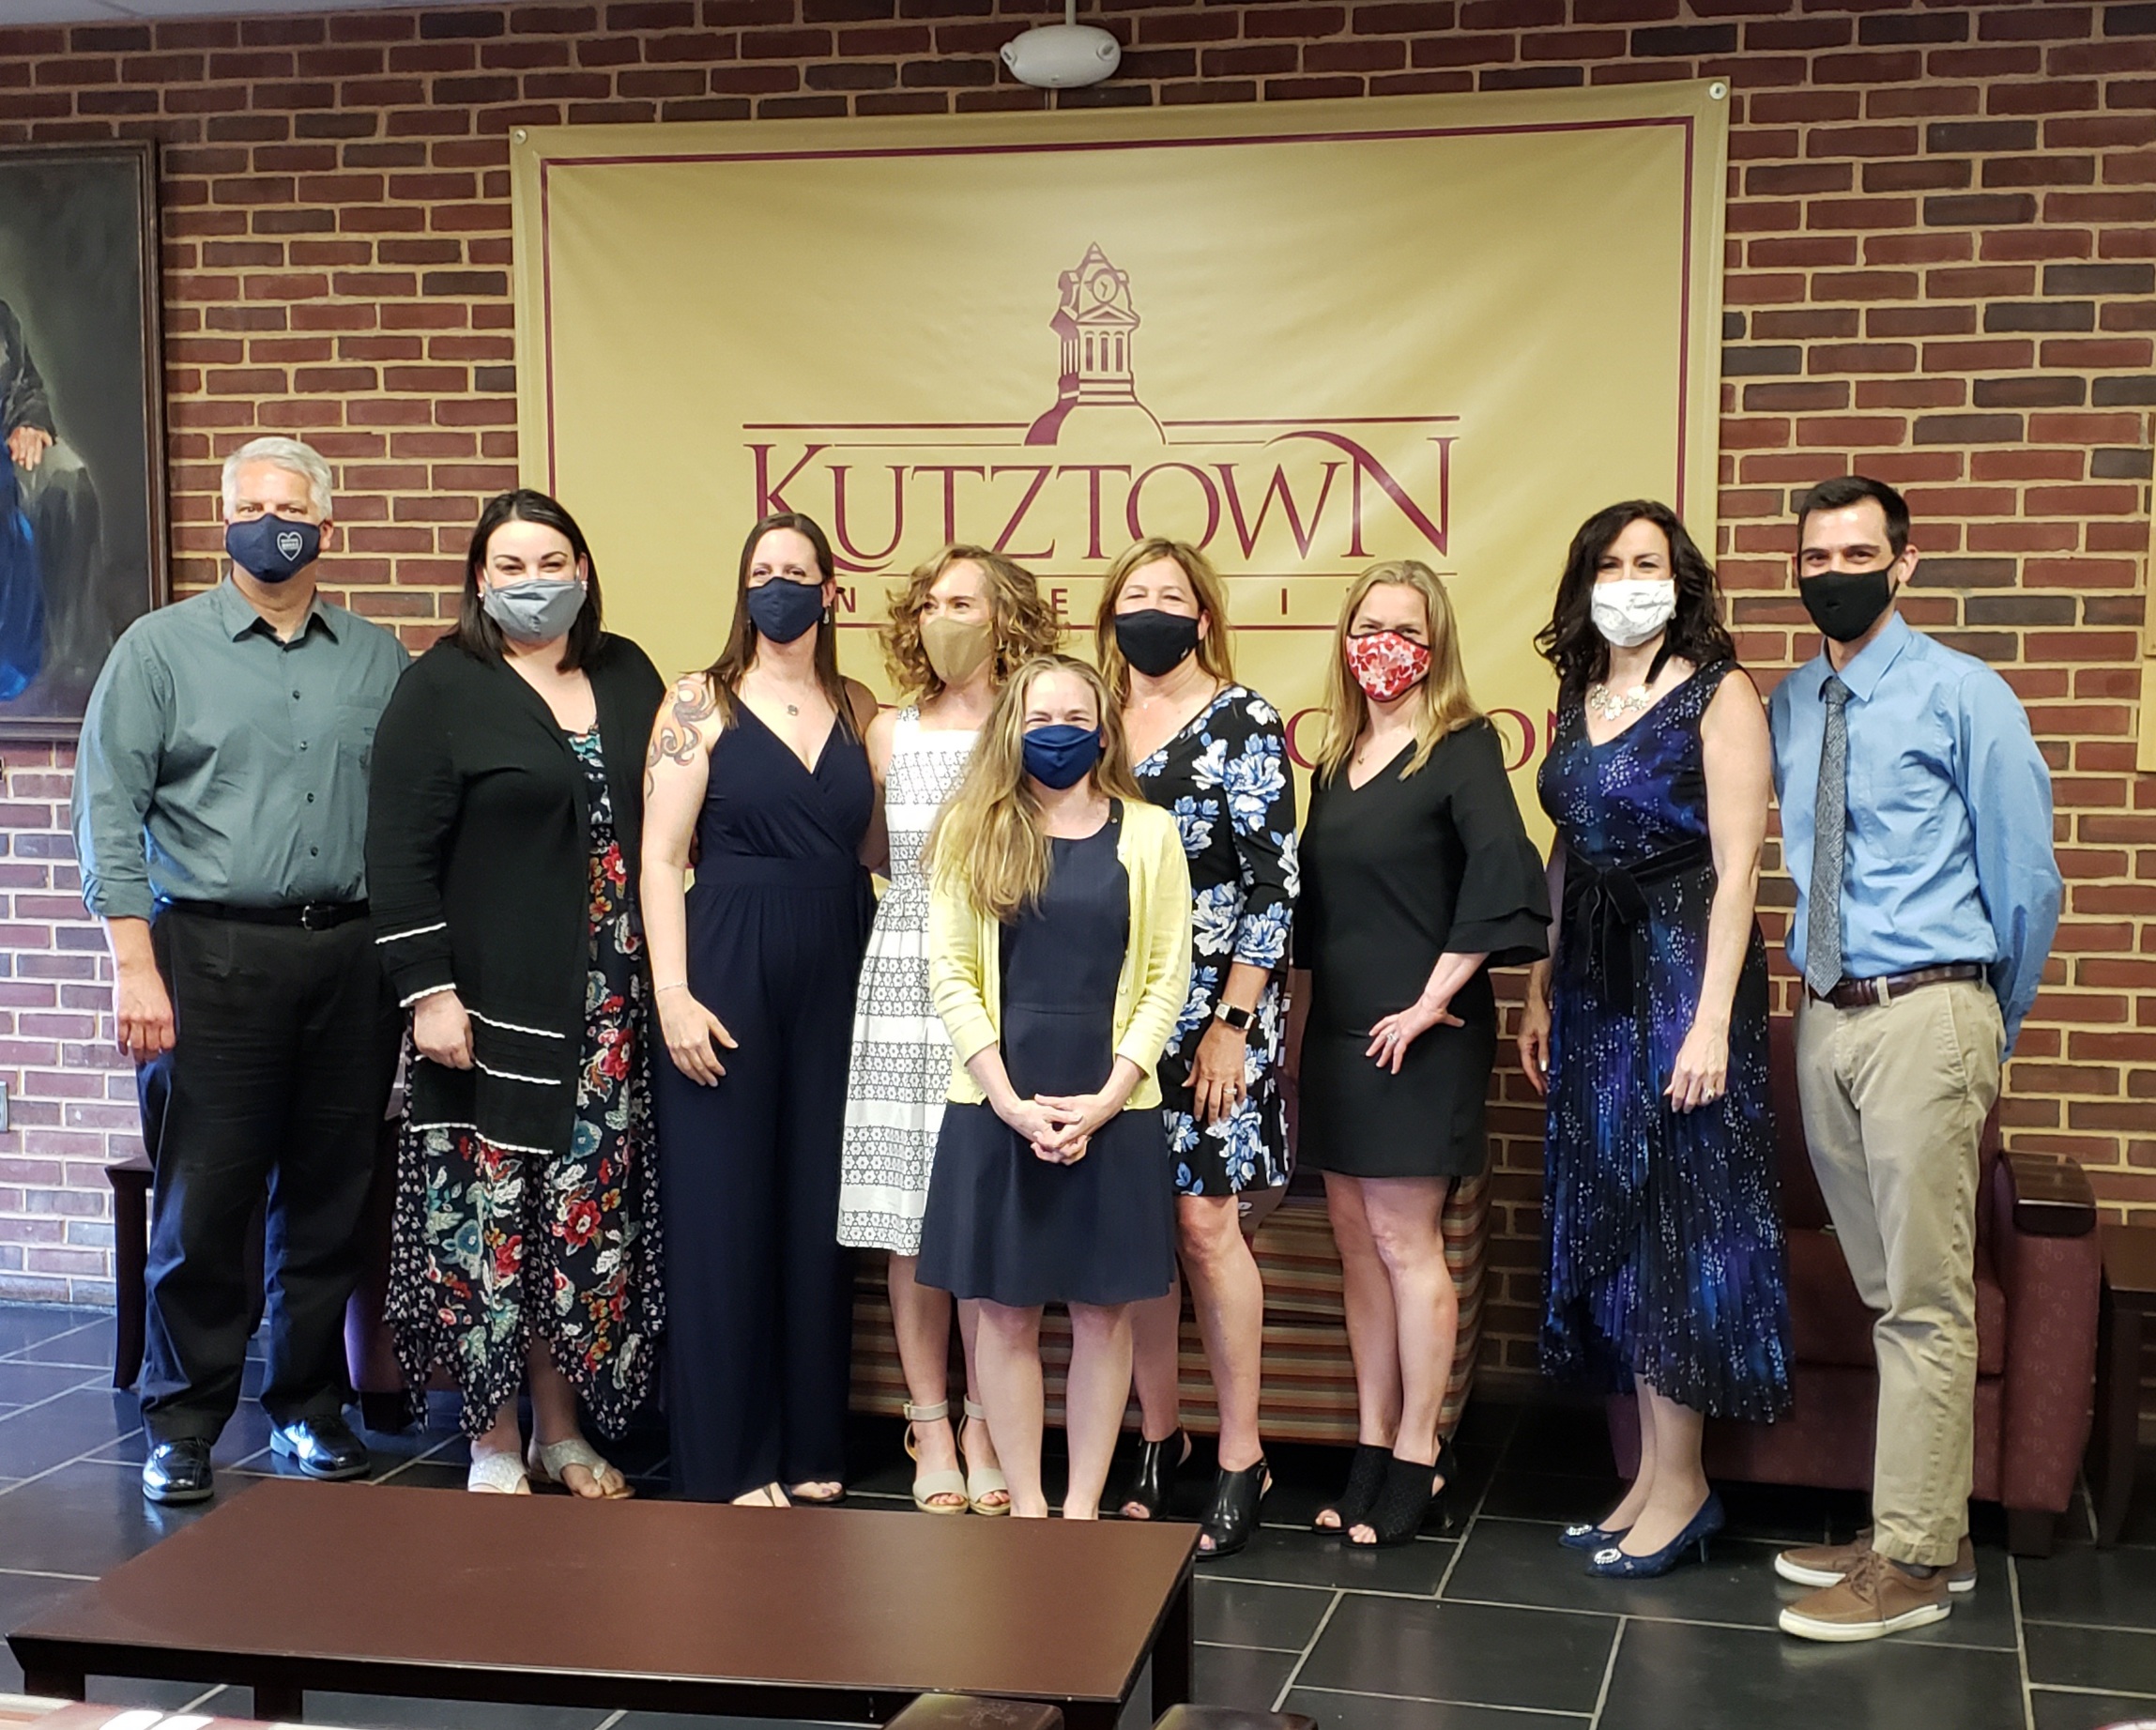 Group photo of Second Education Doctoral Cohort wearing masks and standing in front of a Kutztown University banner